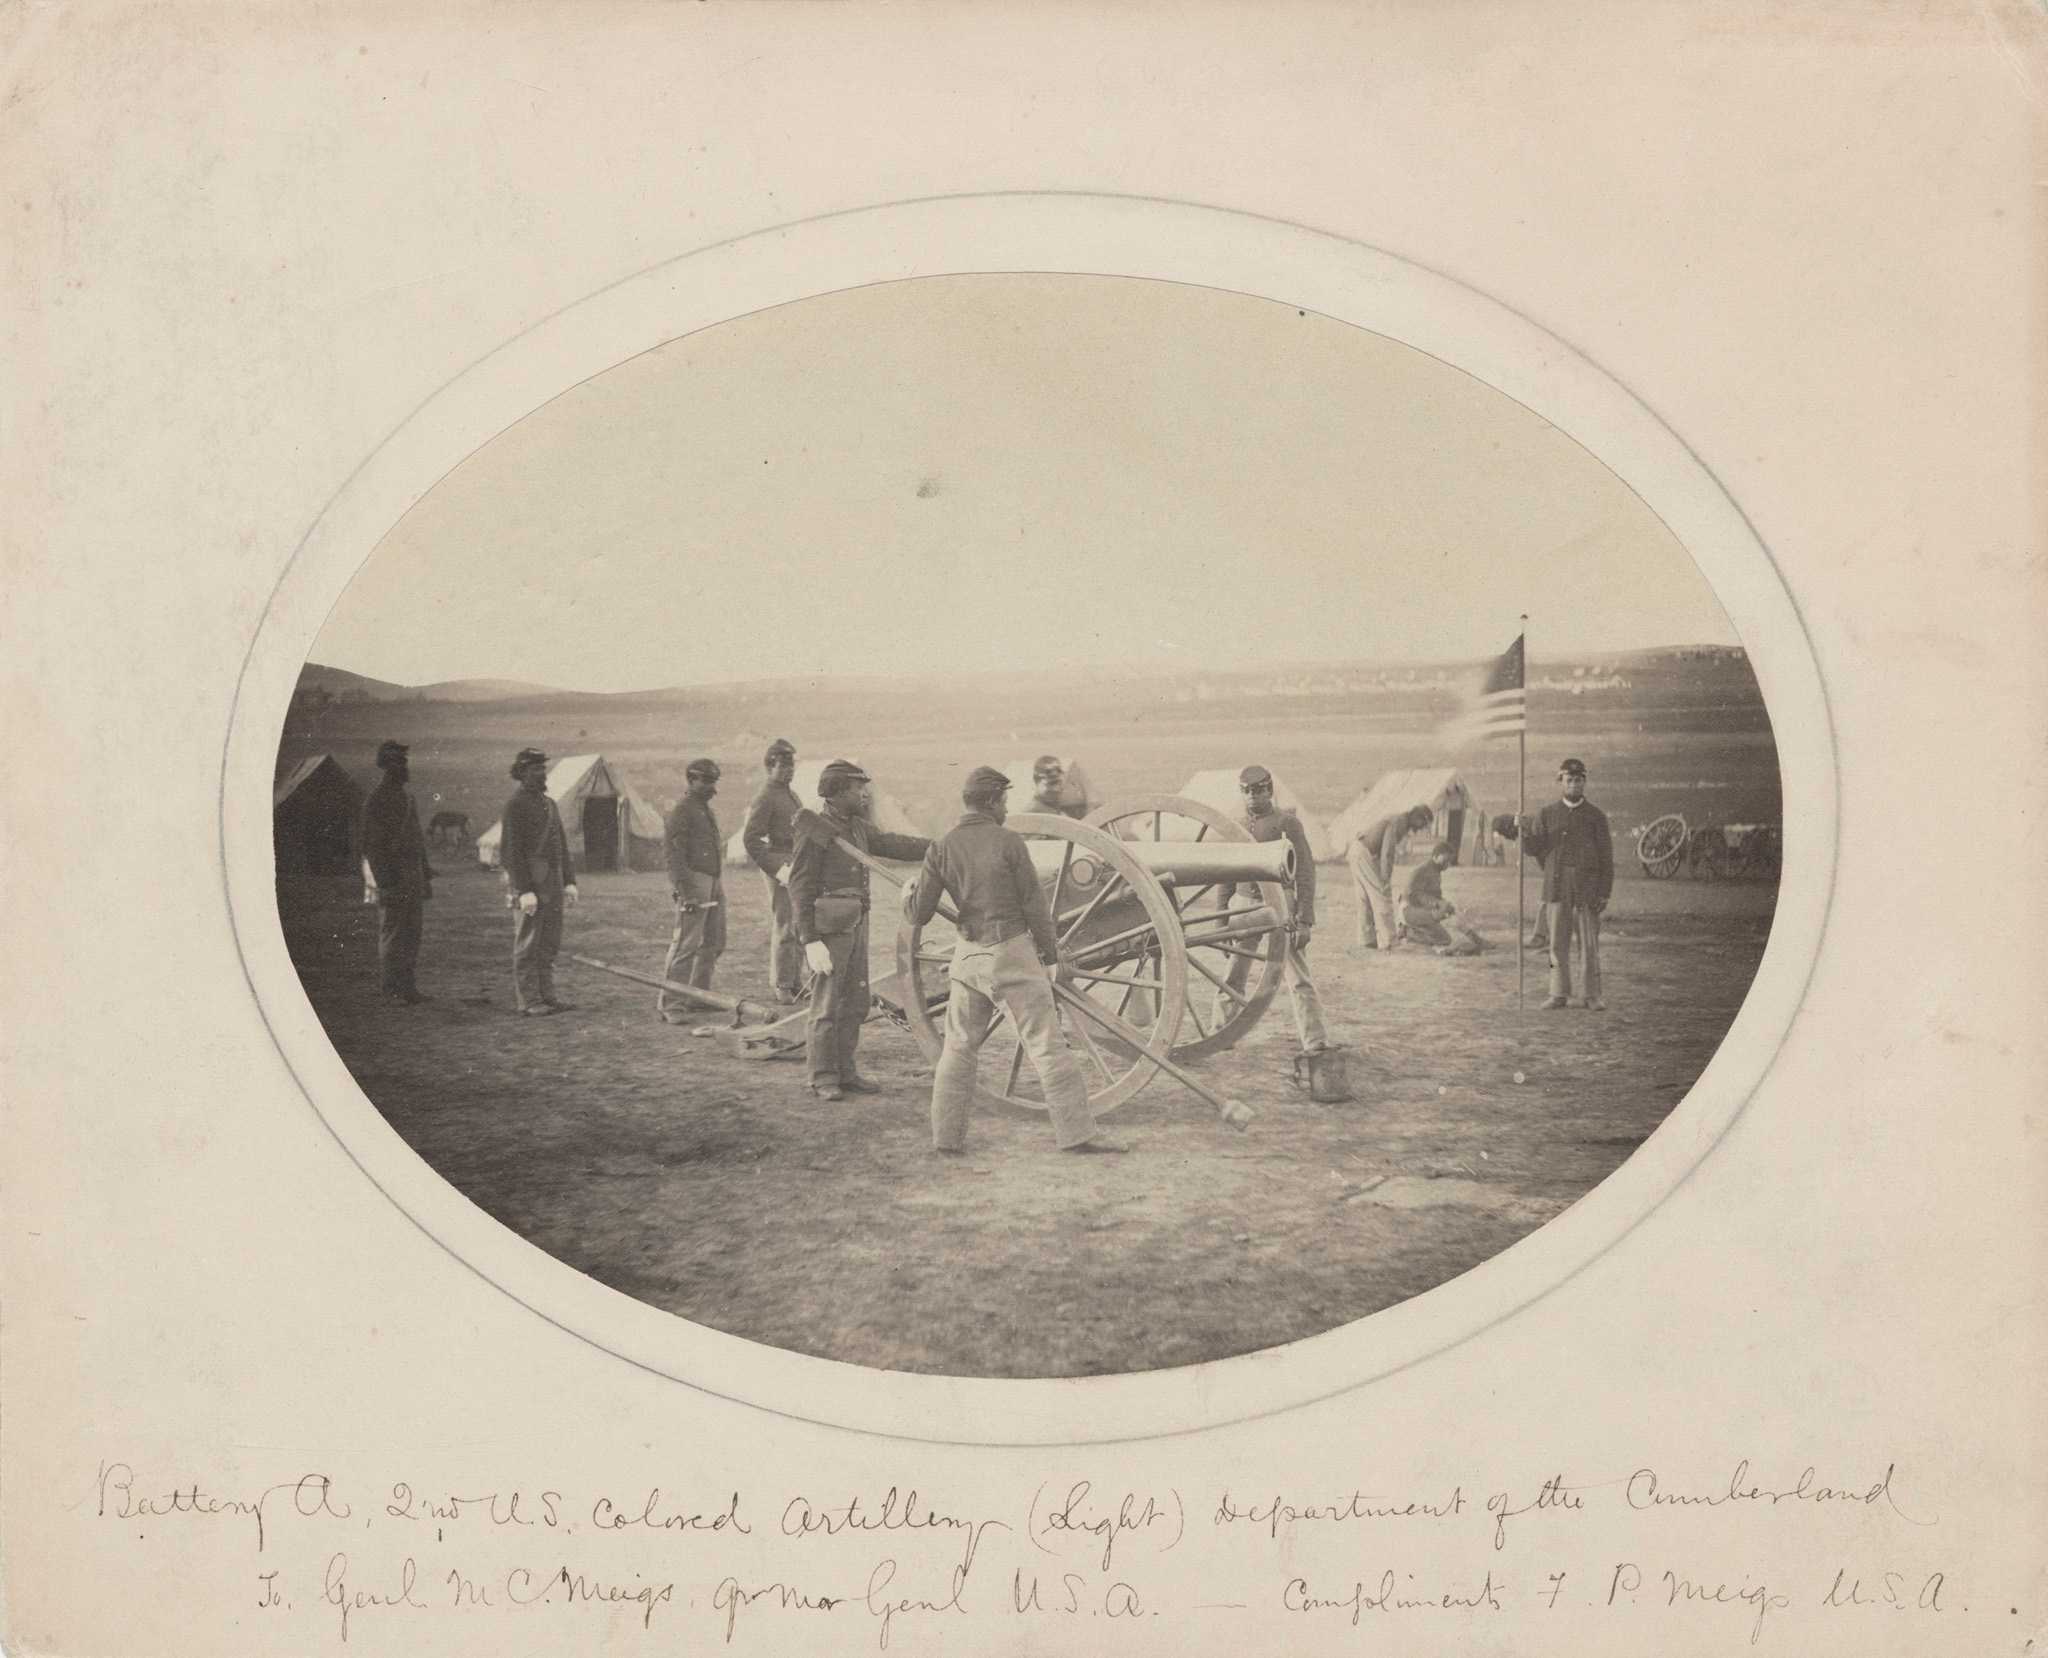 Photograph of U.S. Colored Troops next to a cannon